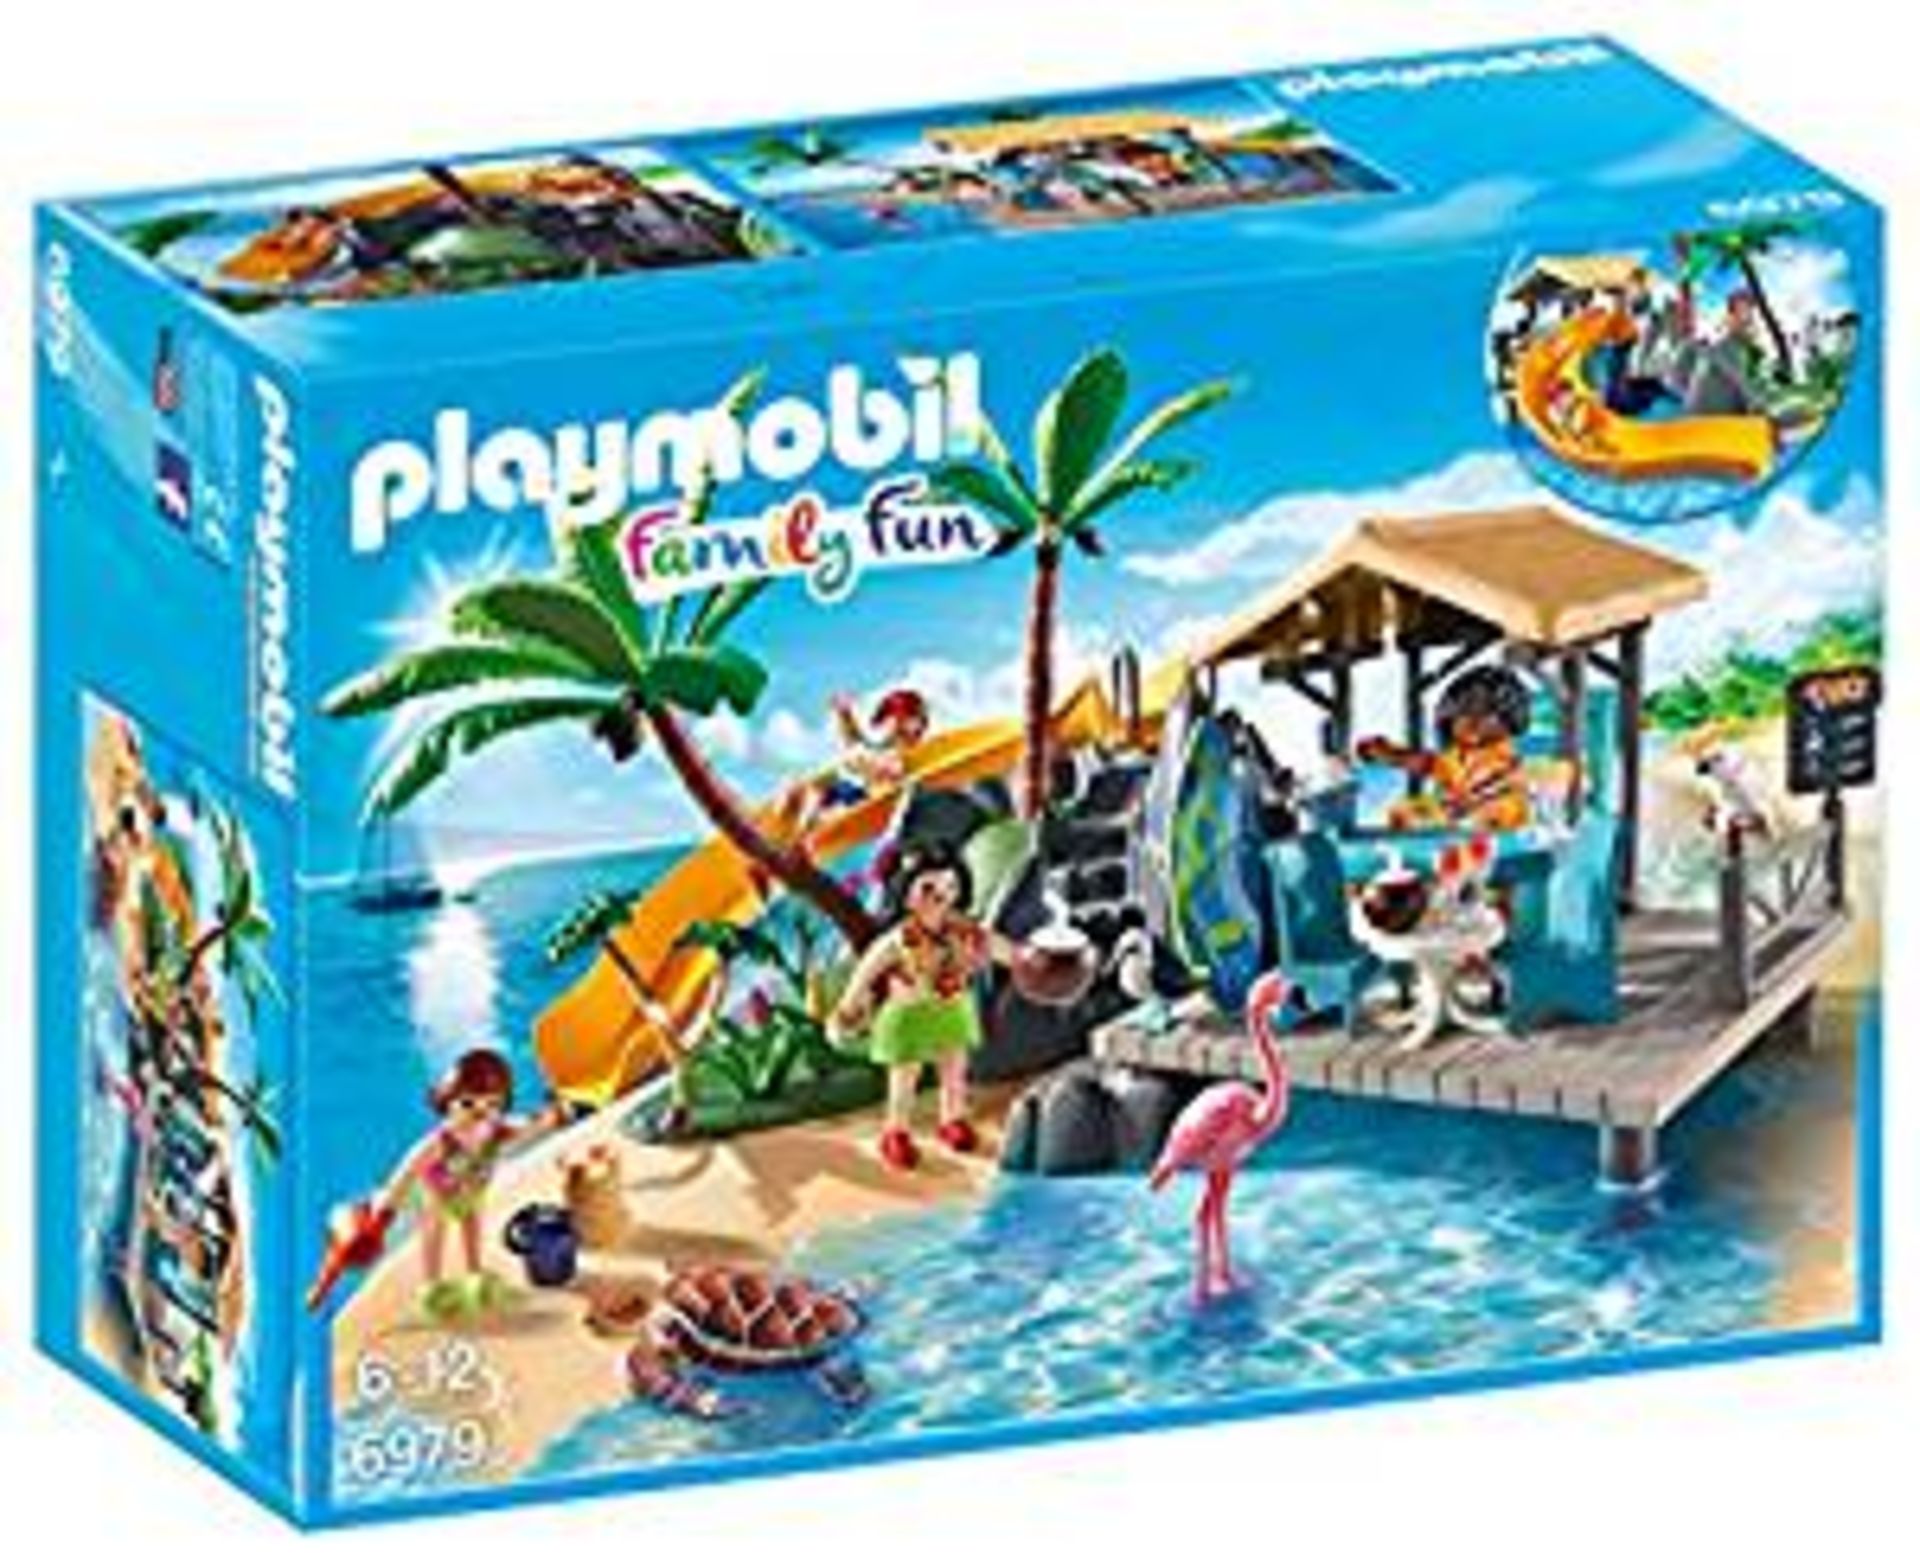 14 x Playmobil toys as described | RRP £732.36 - Image 2 of 4